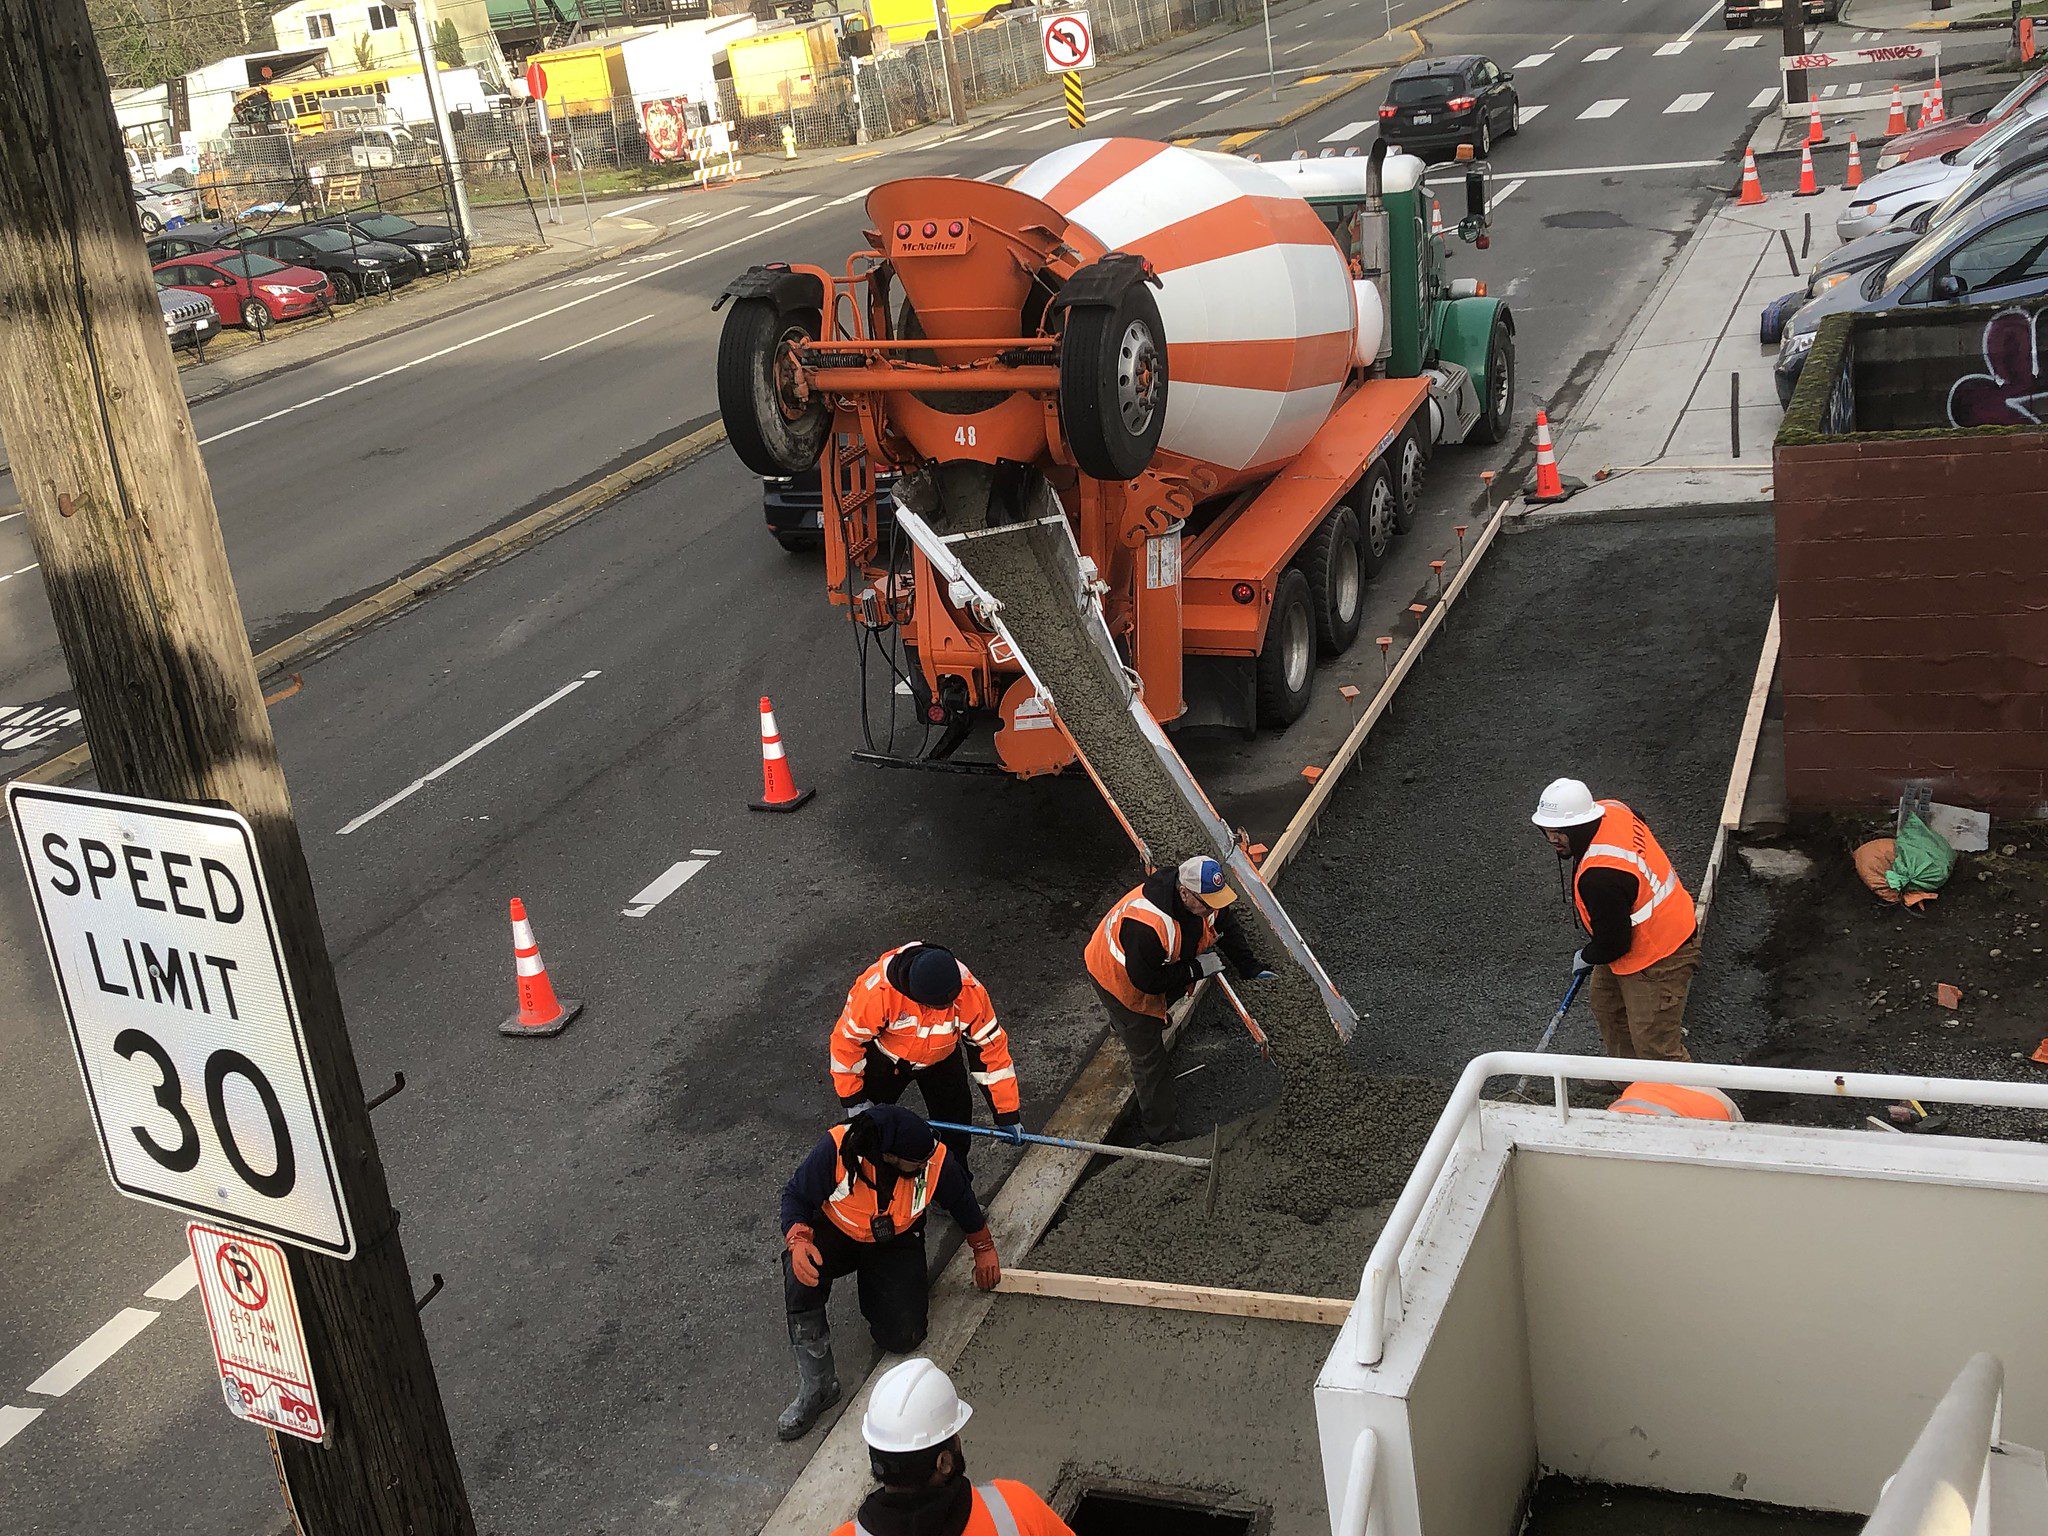 Several people wearing orange construction vests work to pour new concrete along a street. Parked cars are in the background, and a large orange and white cement truck is in the middle of the photo.